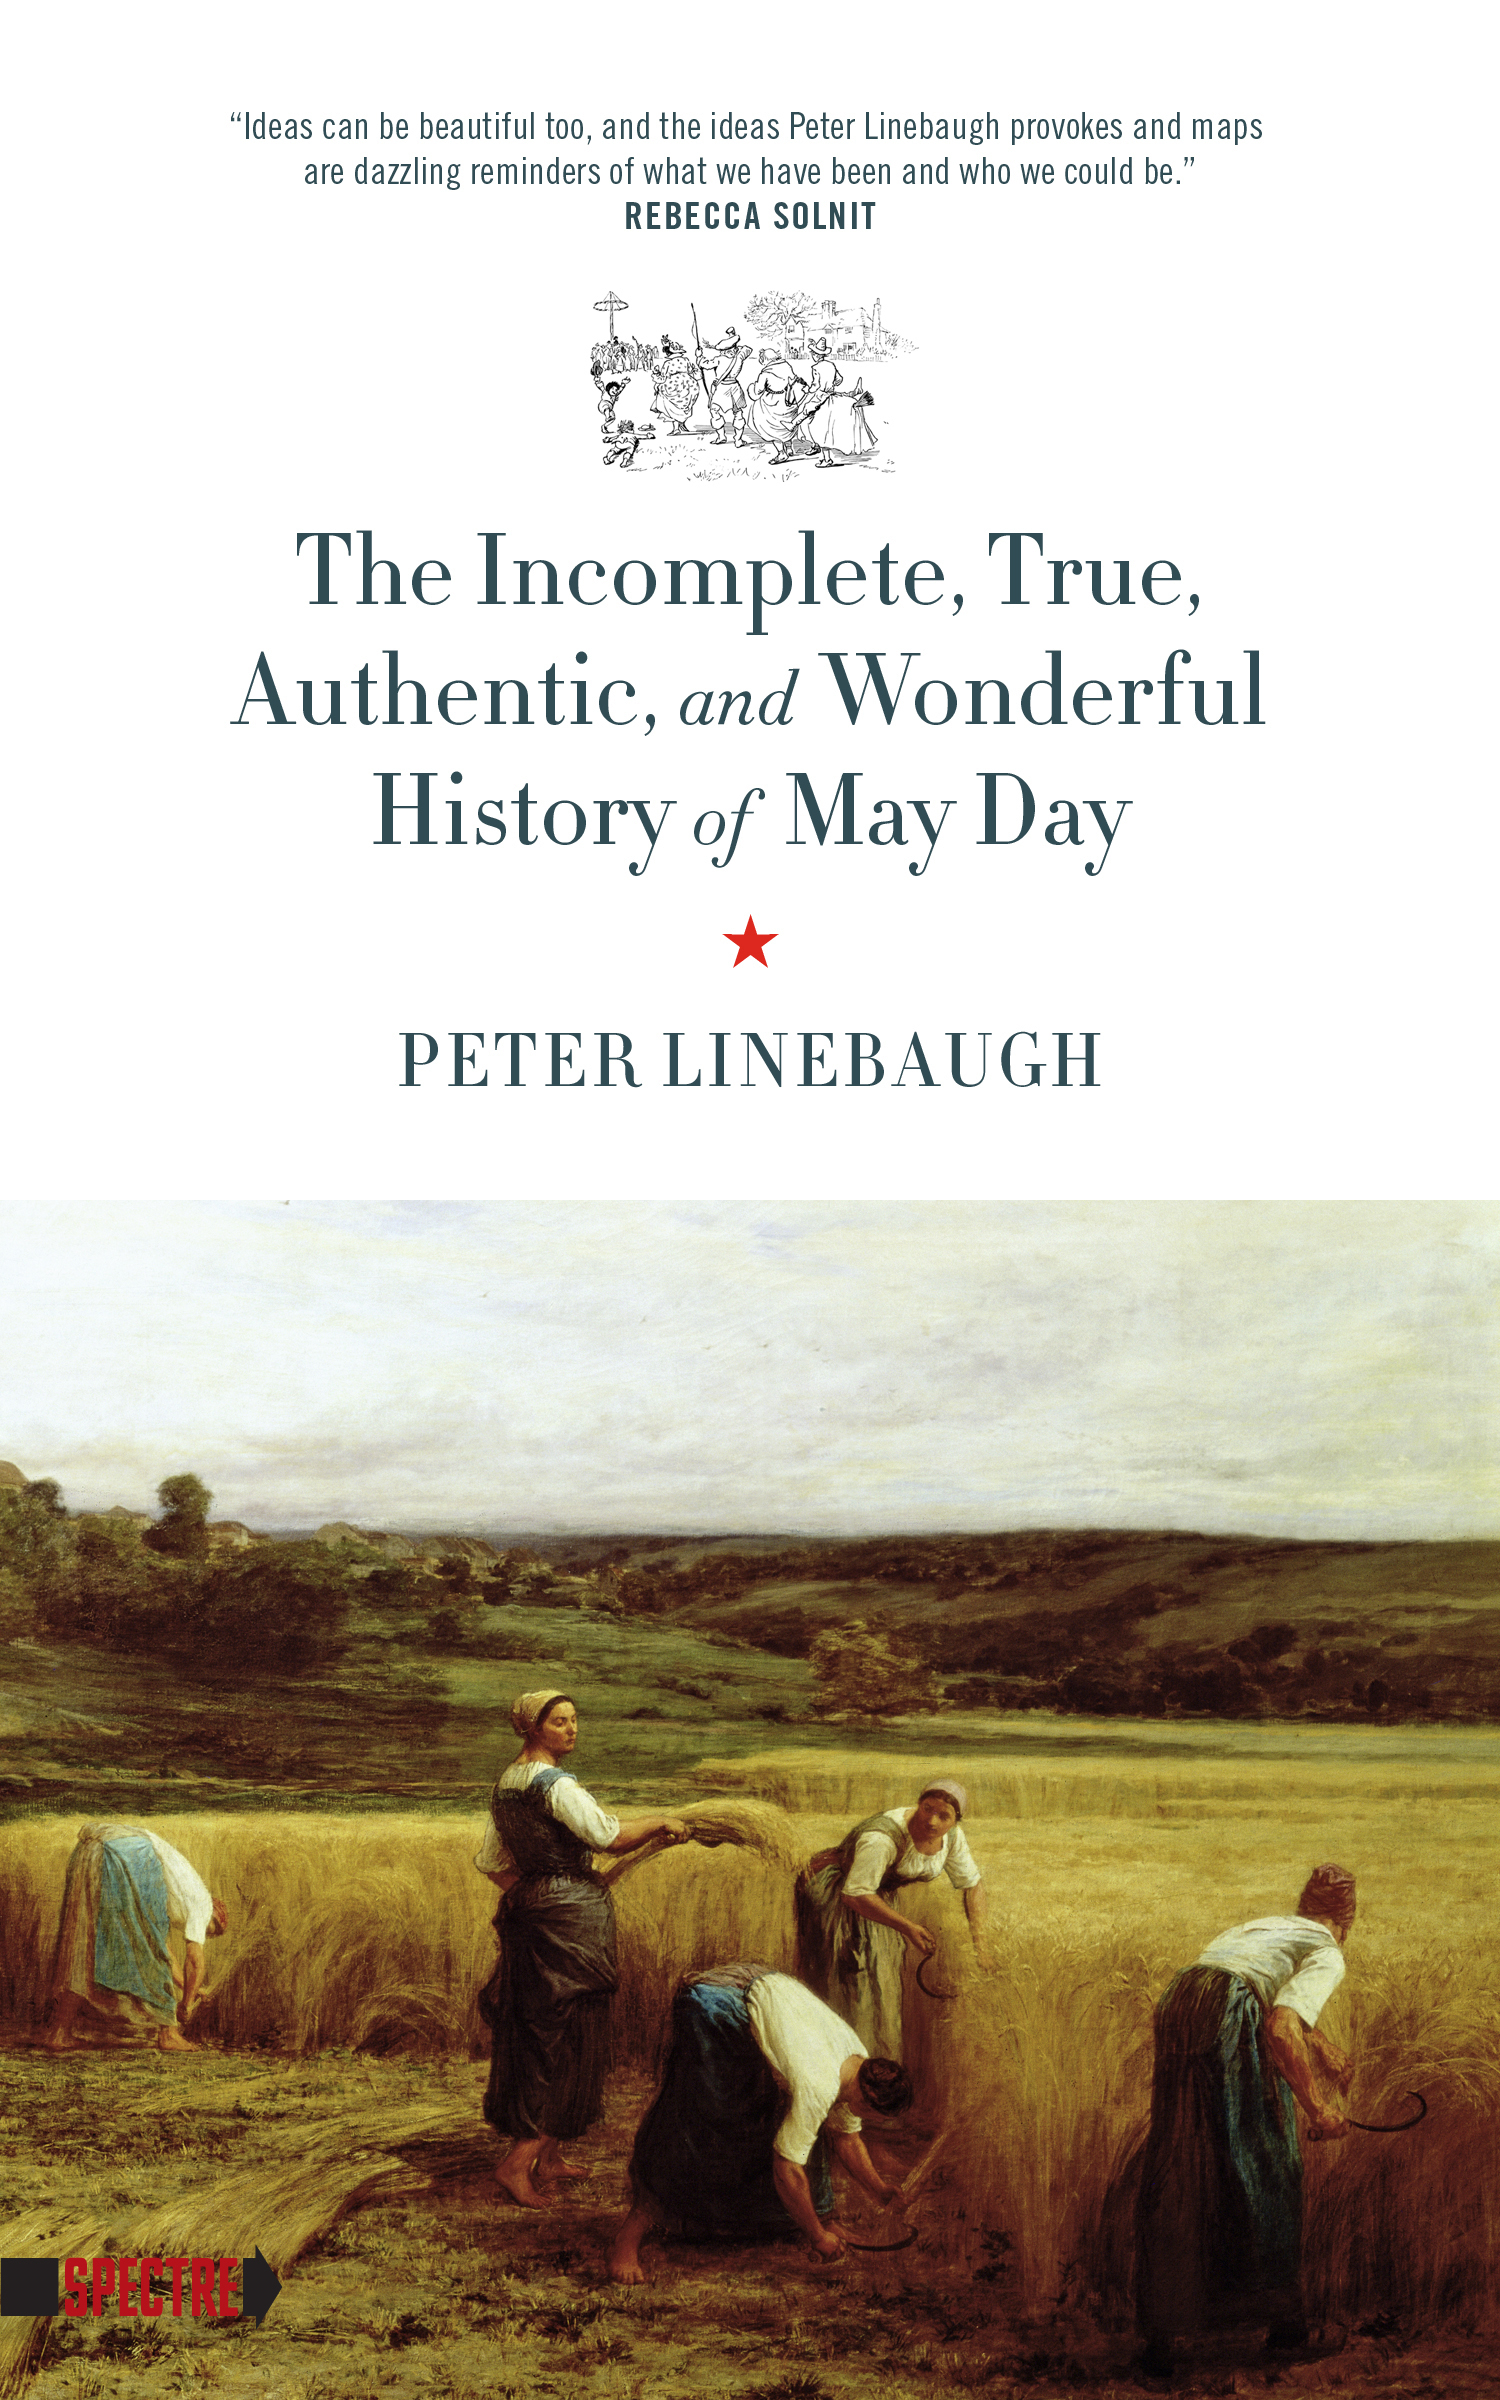 Book Event: The Incomplete, True, Authentic, and Wonderful History of May Day